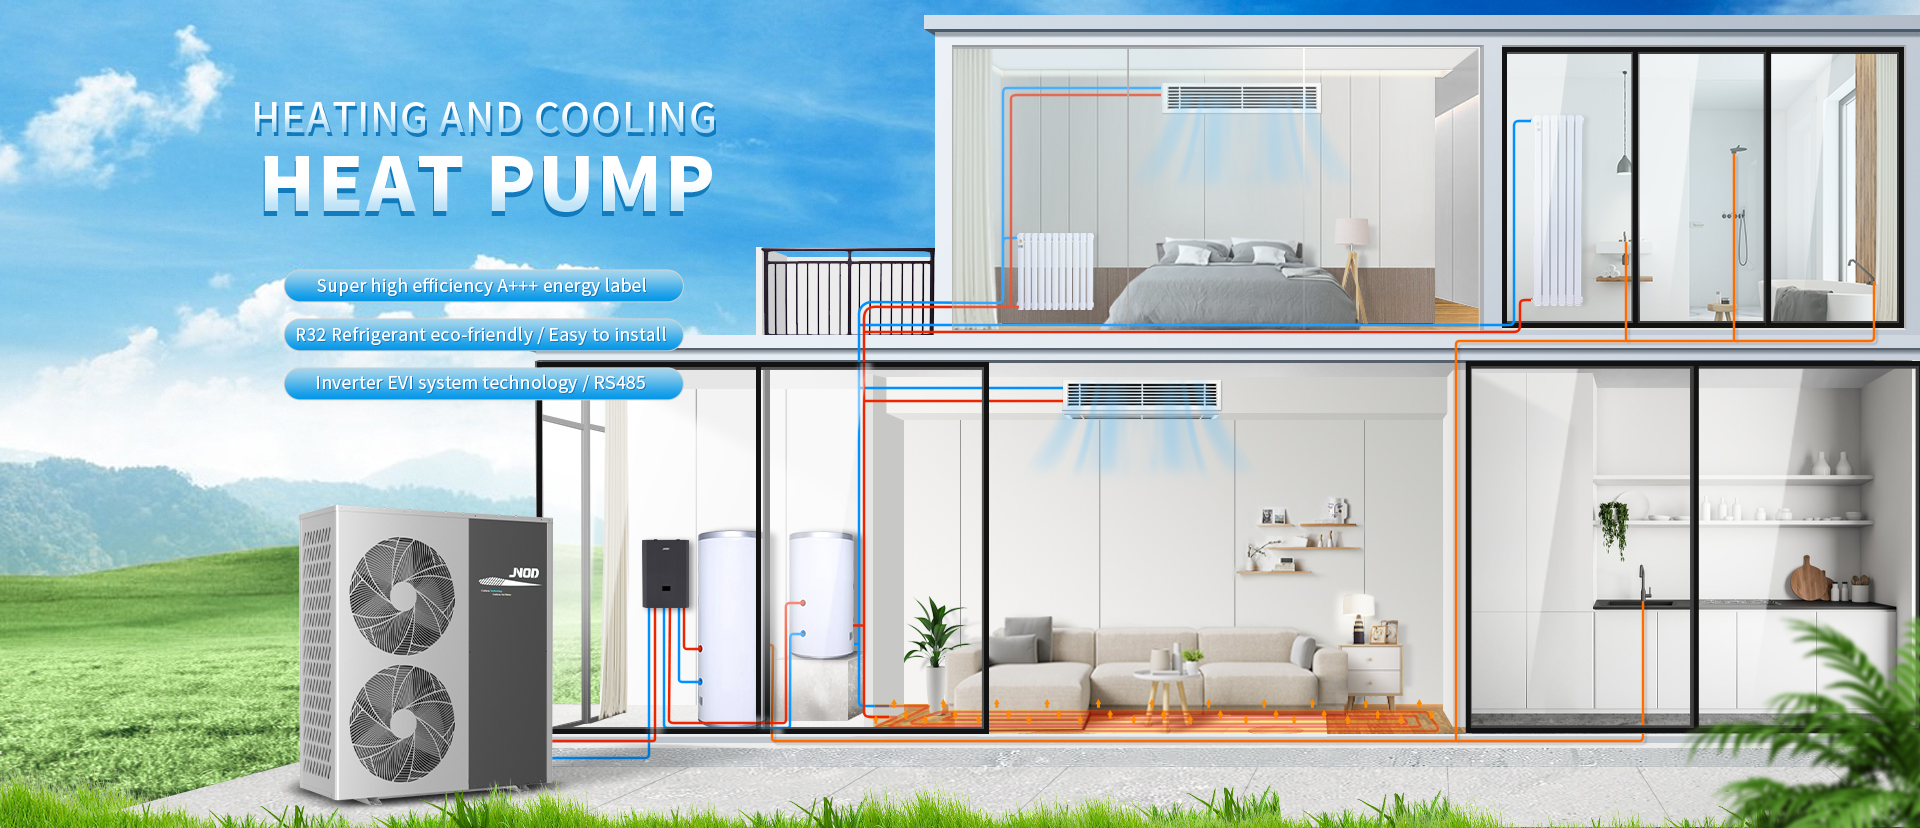 Universal Earth Heating And Cooling Heat Pump